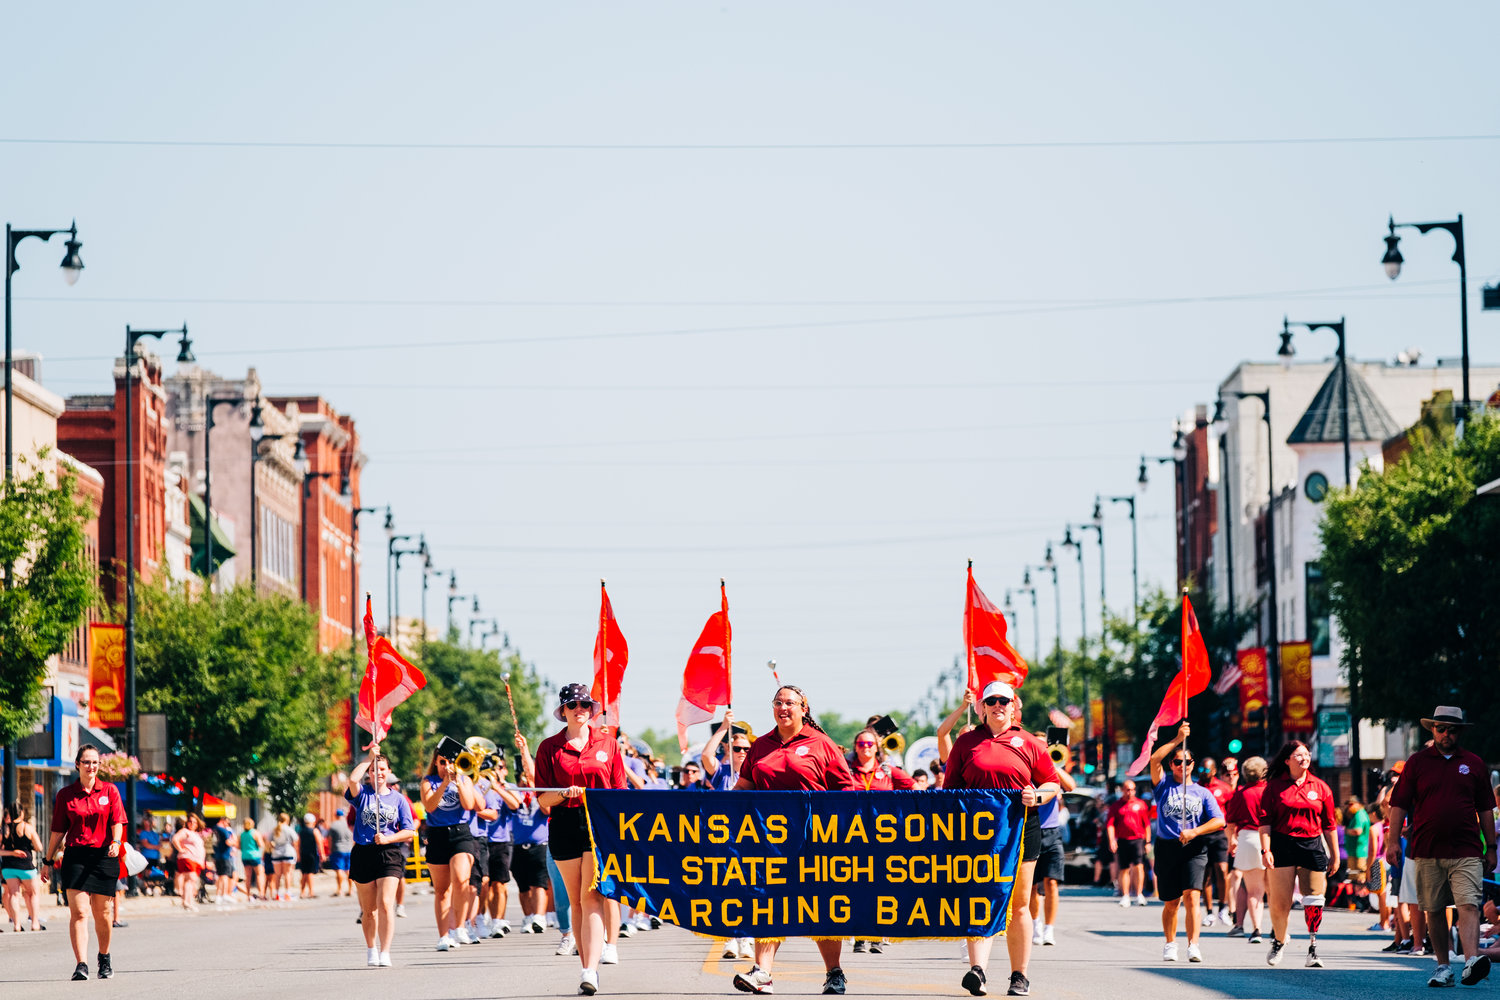 The Kansas Masonic Marching Band participates in the Shrine Bowl parade, marching down Broadway in Pittsburg on Saturday.